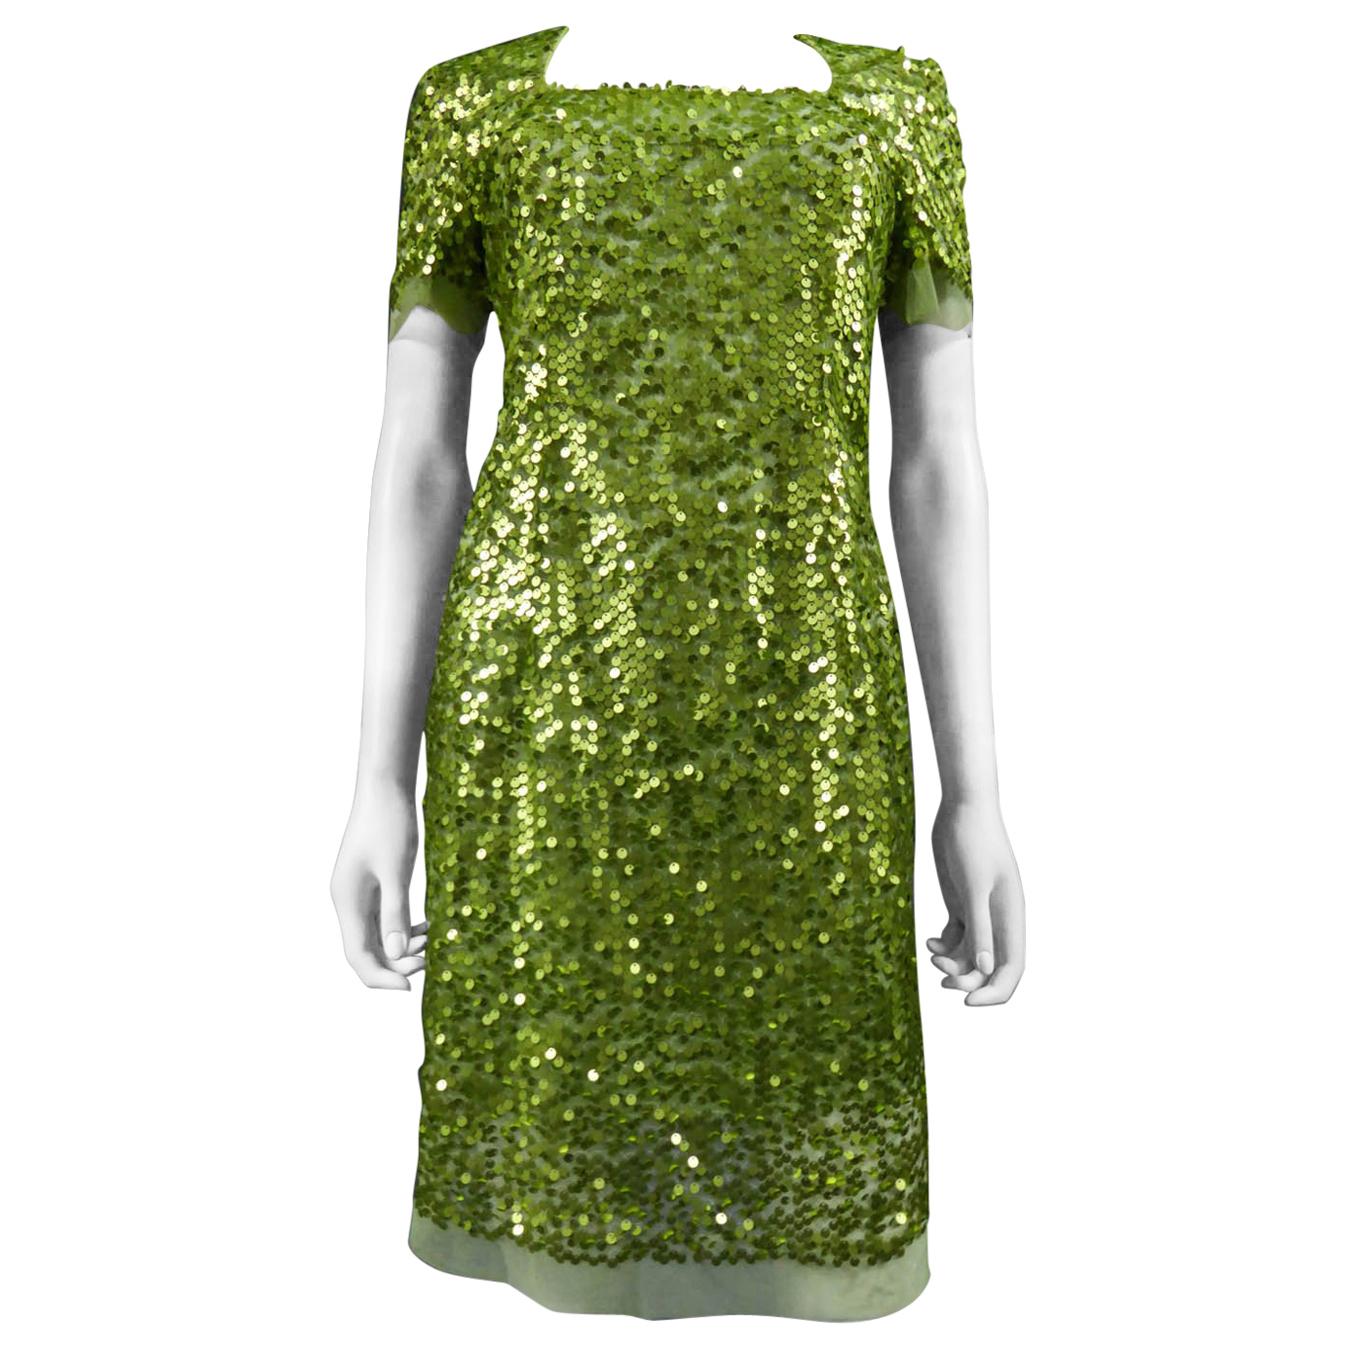 Circa 1990/2000
France

Short dress in green tulle embroidered with iridescent green glitter. Square collar and slin-tight, it closes at the back with a zip. Lining in green synthetic. No label but Couture hand made work. Very good condition of